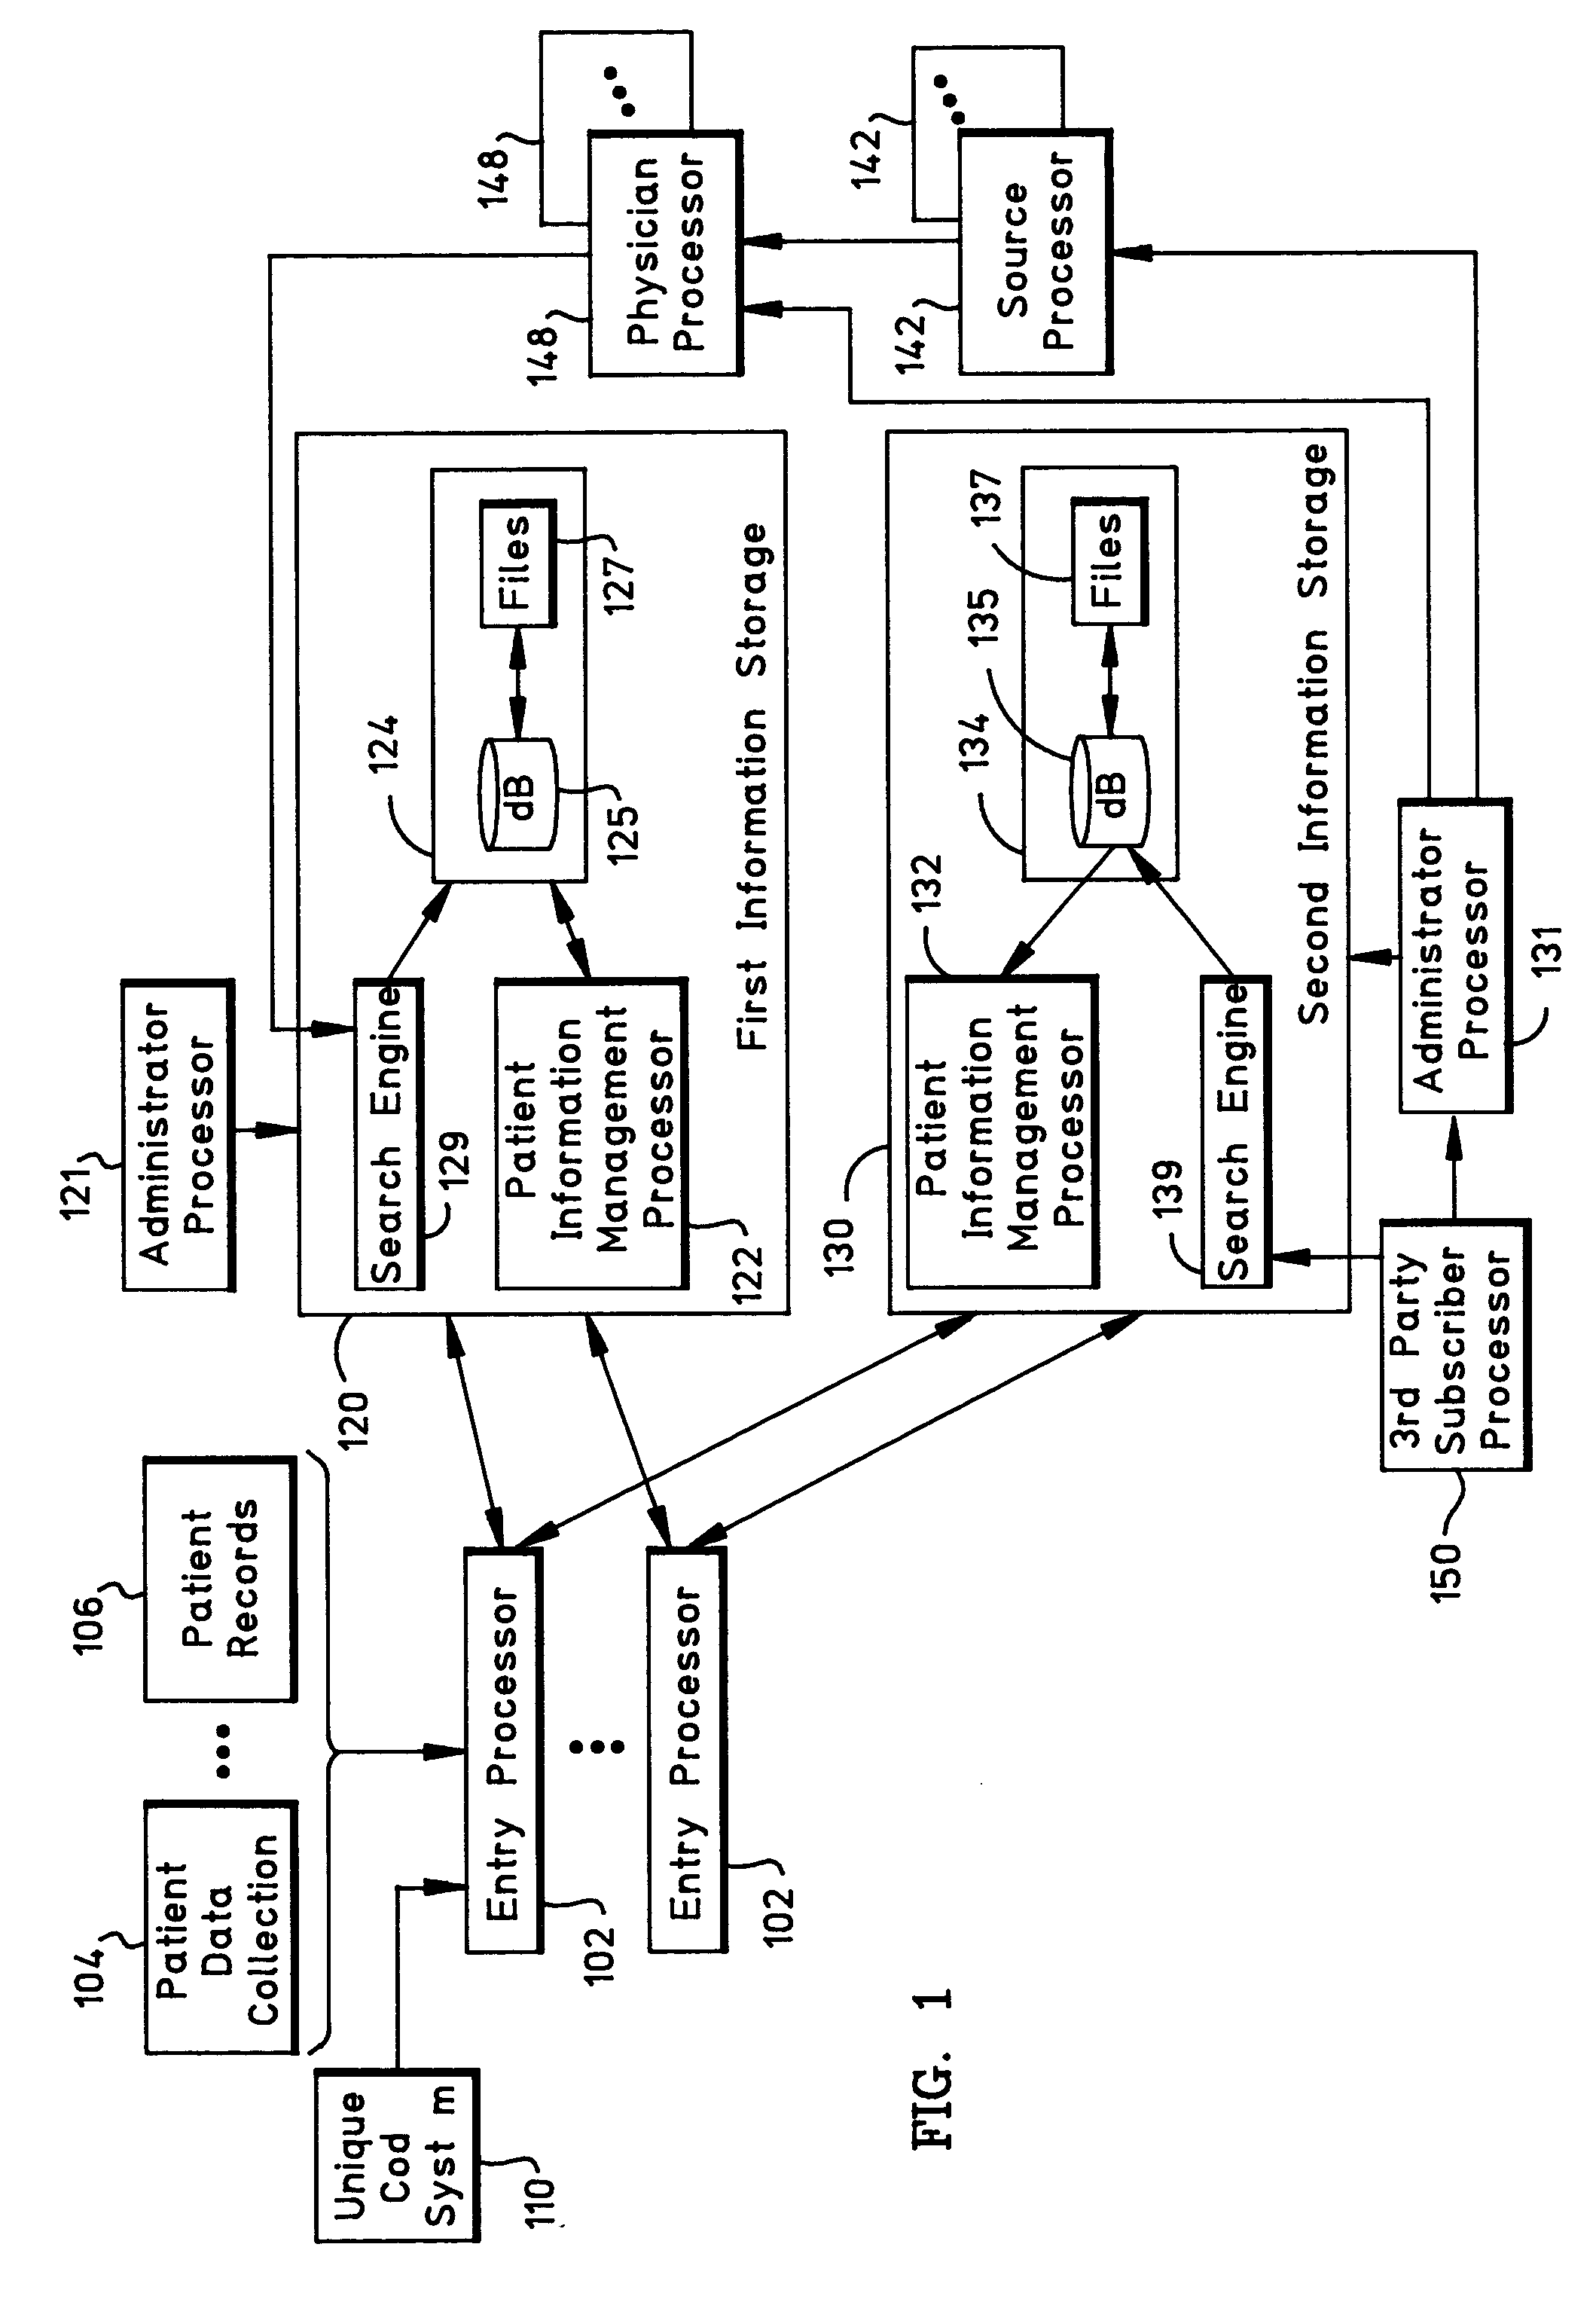 System, method, and business method for storage, search and retrieval of clinical information